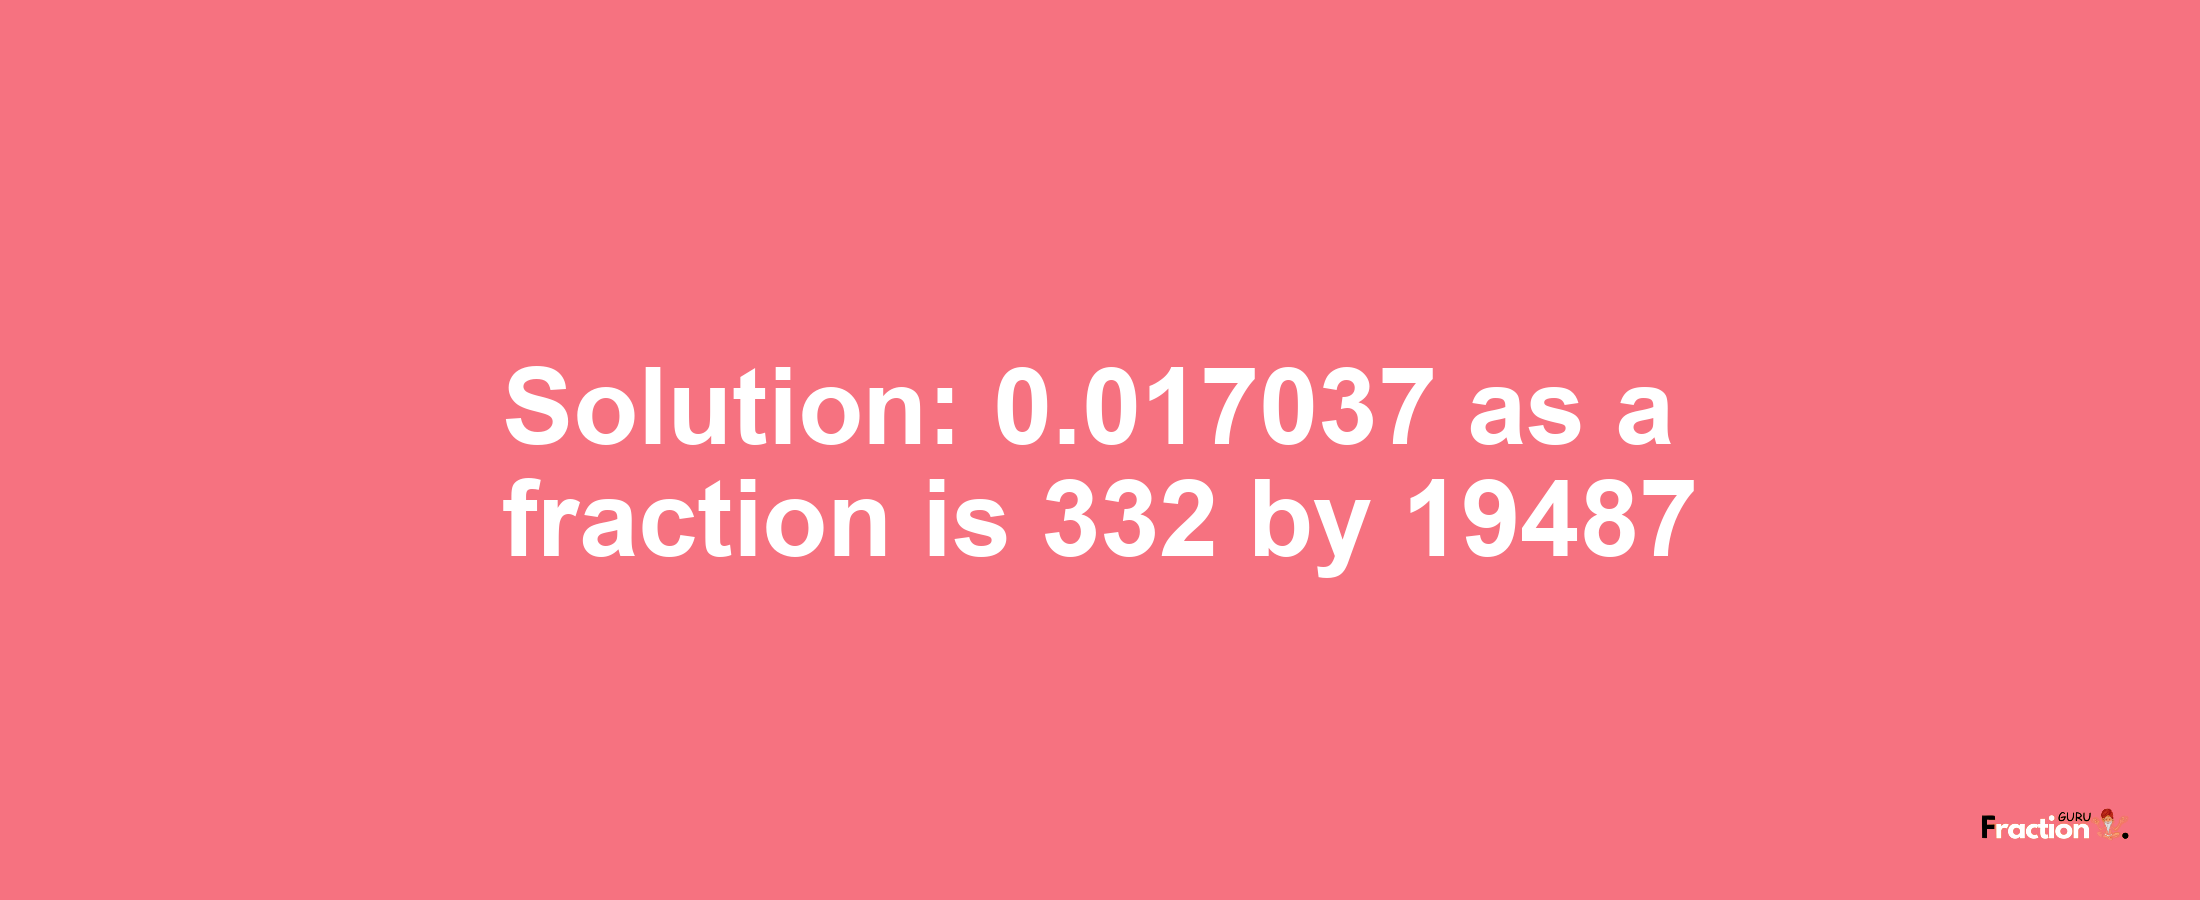 Solution:0.017037 as a fraction is 332/19487